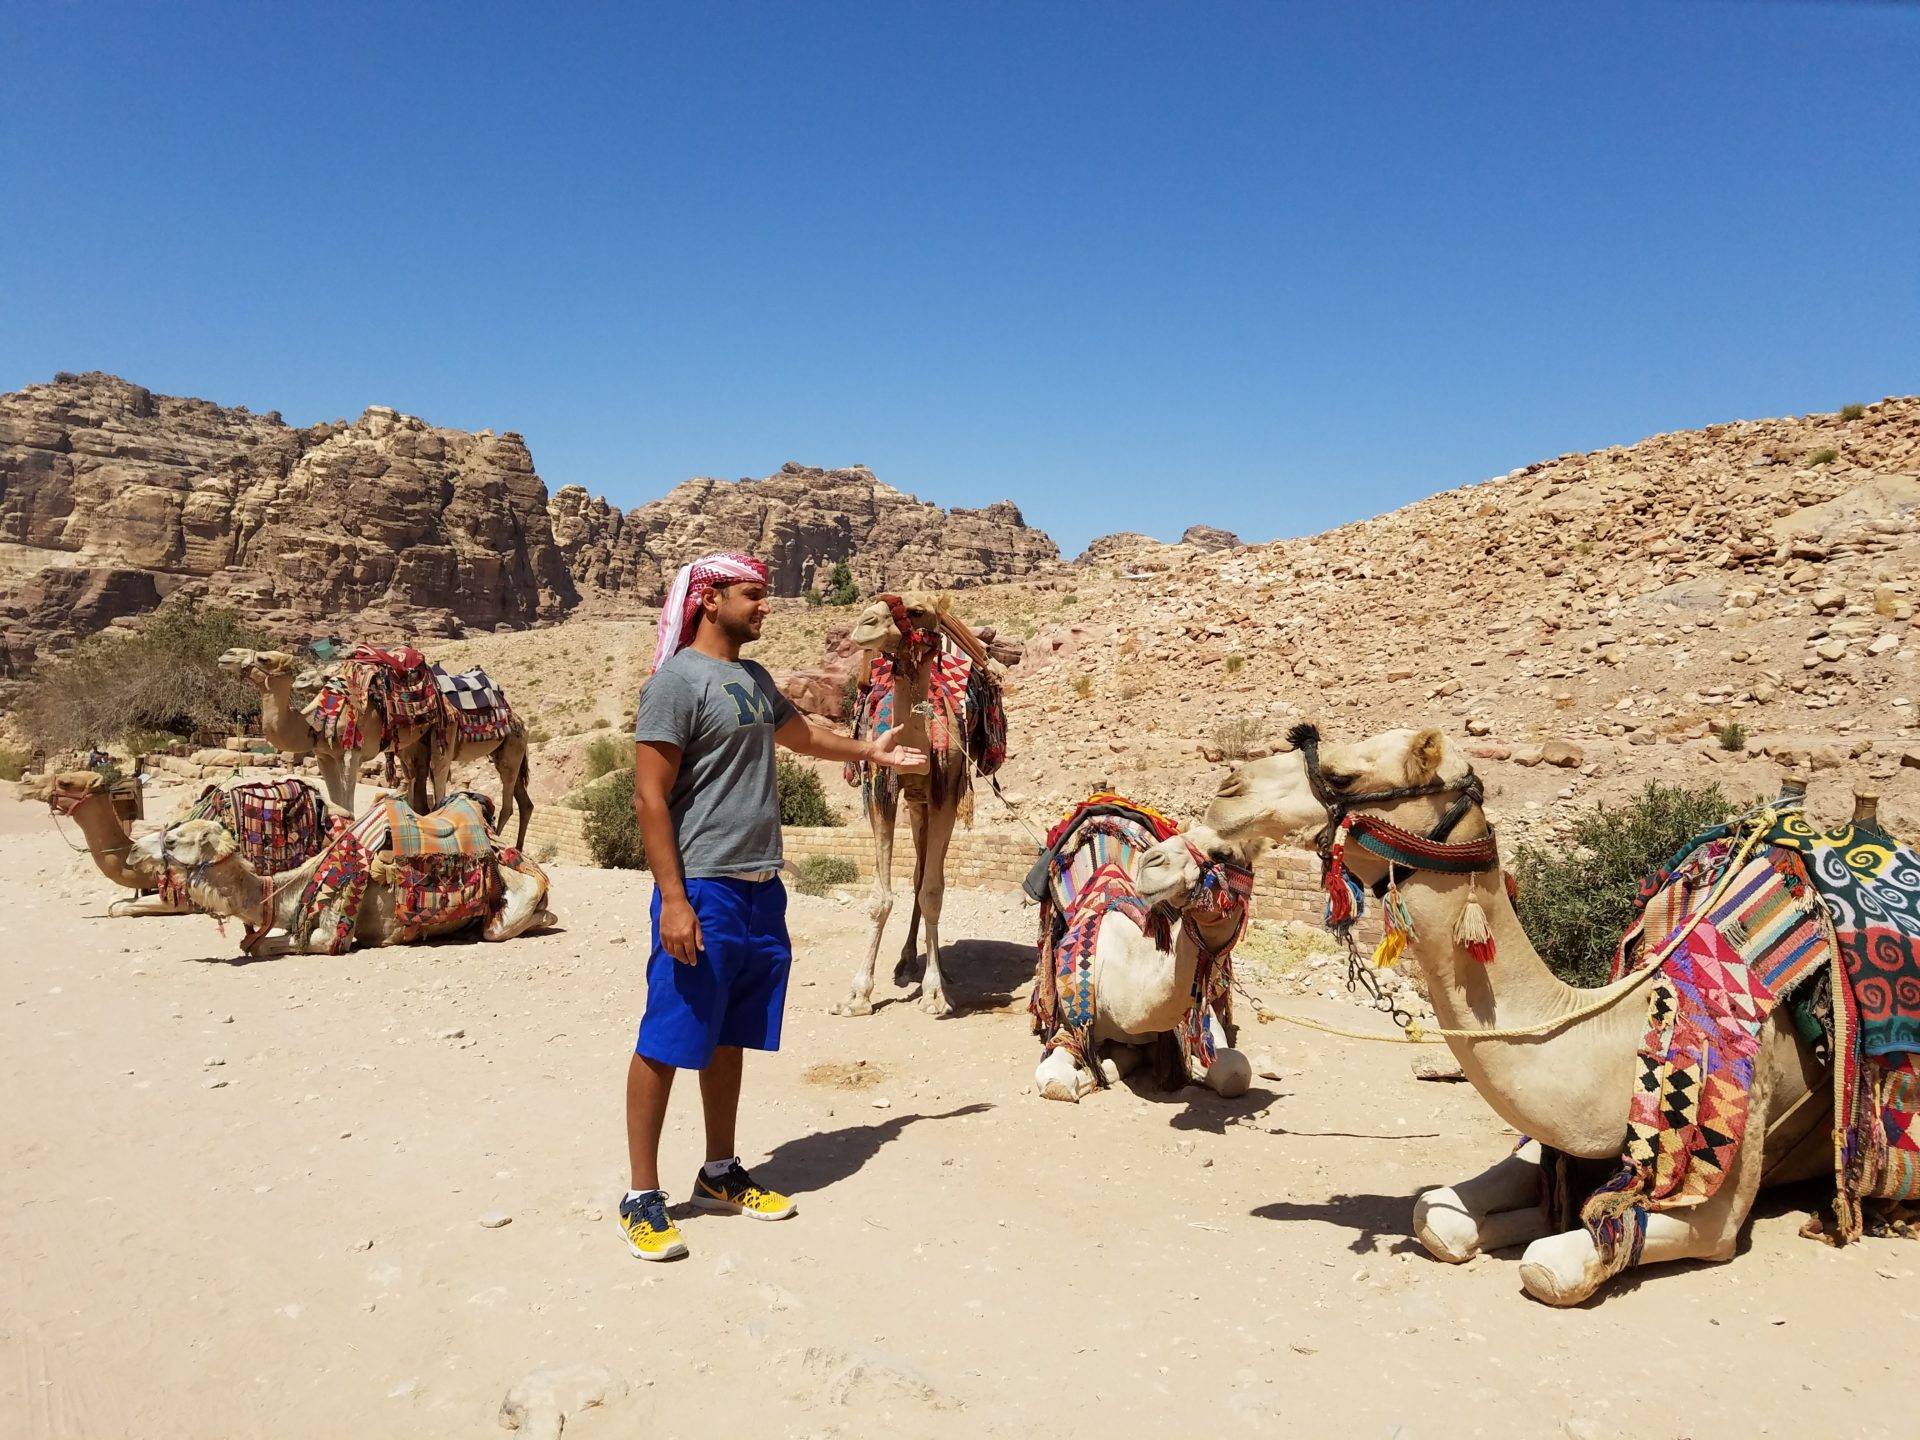 a man standing next to camels in the desert